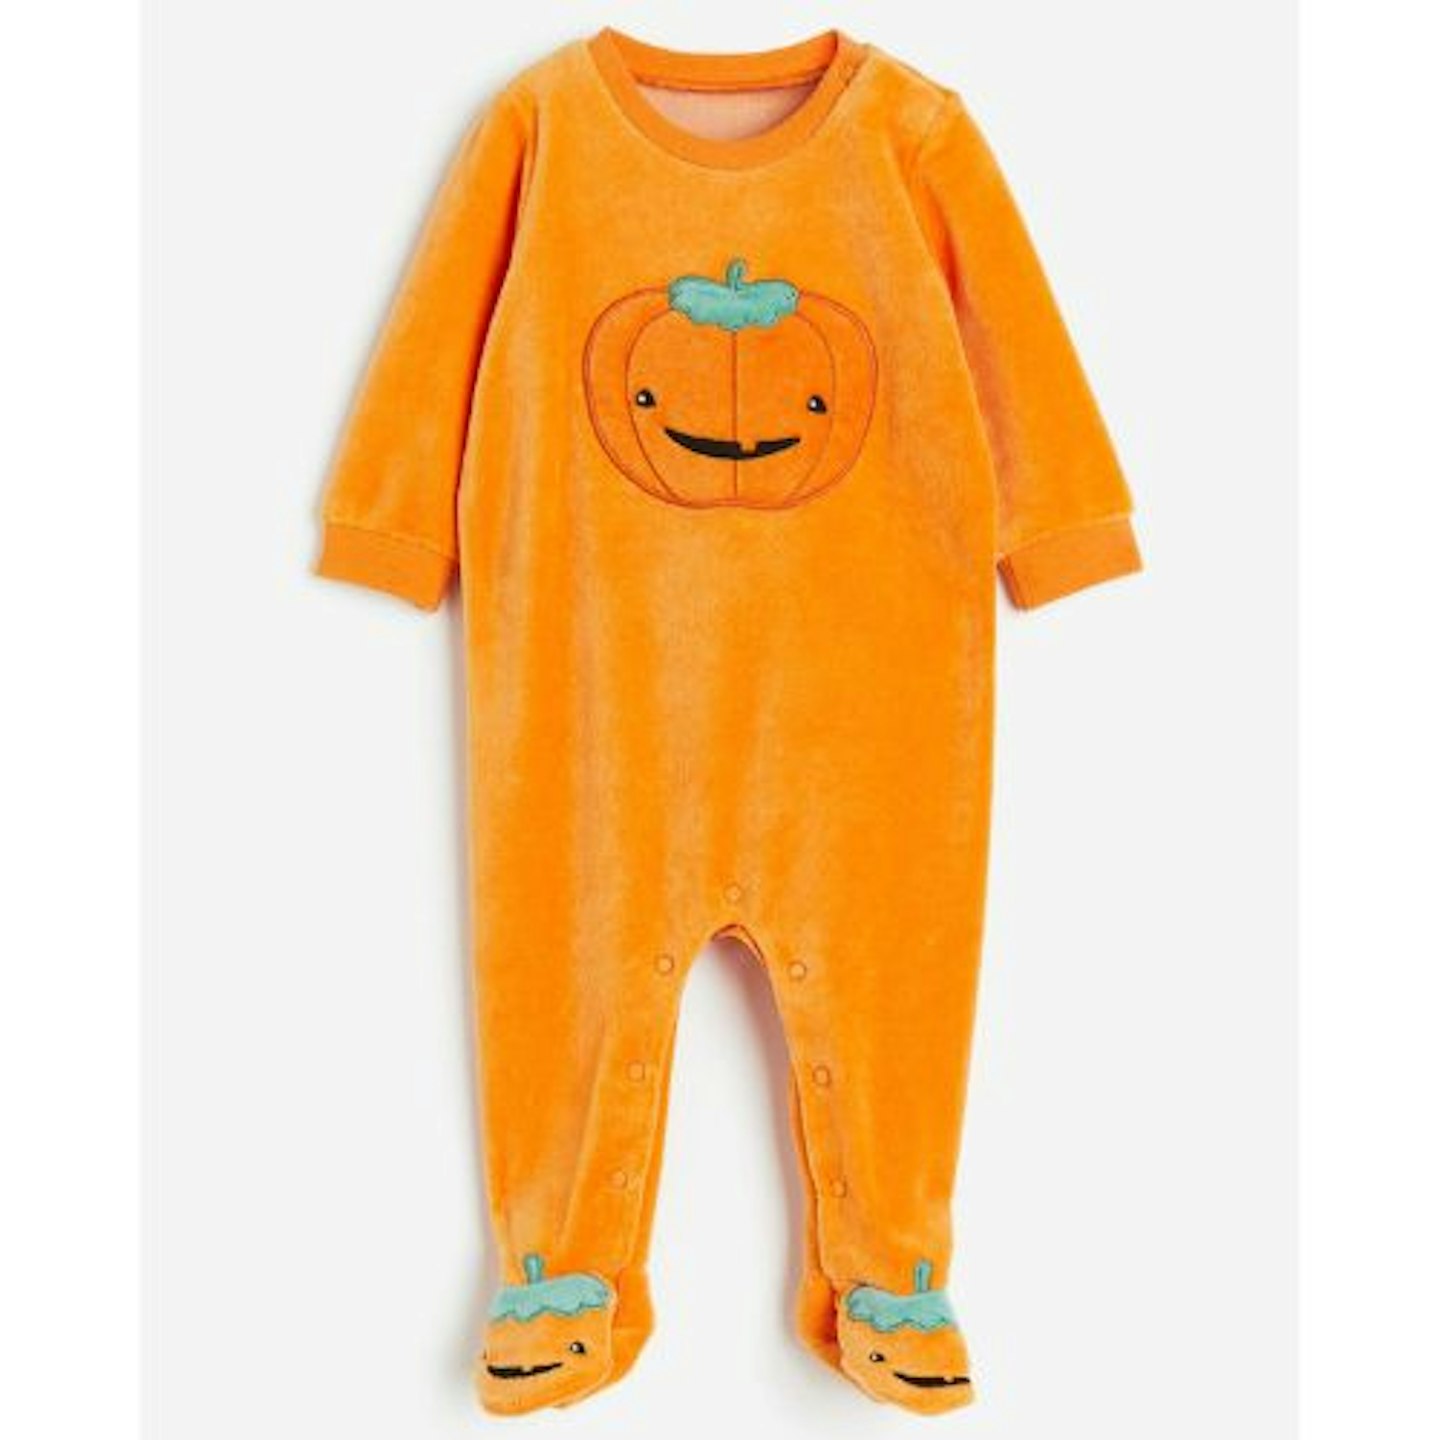 The Best Baby Halloween Costumes: Velour sleepsuit with full feet